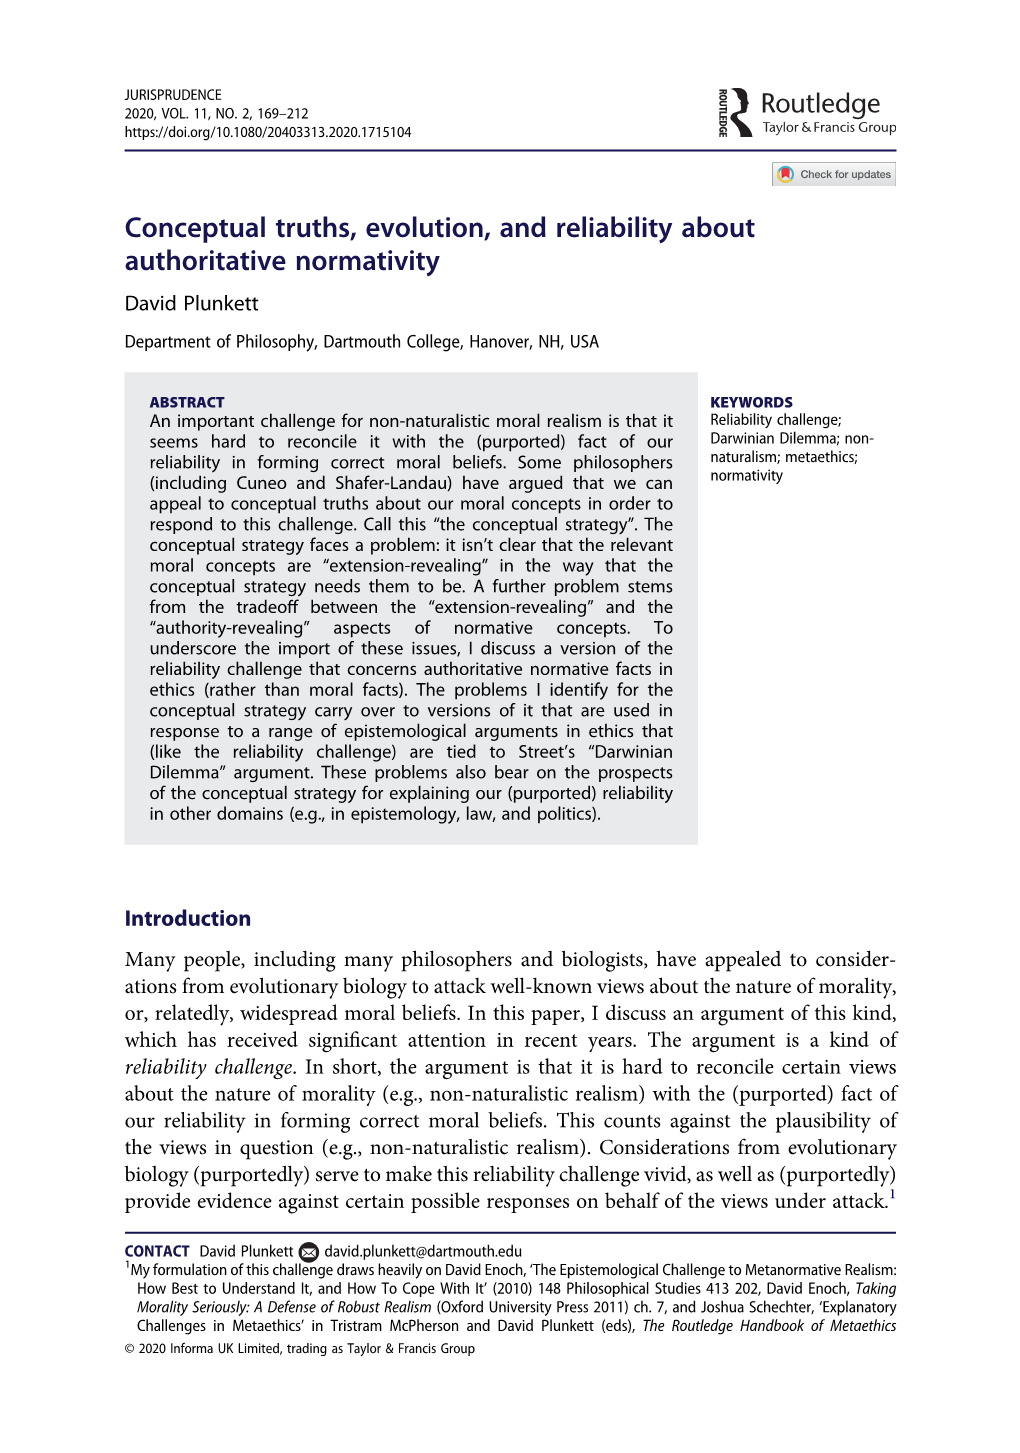 Conceptual Truths, Evolution, and Reliability About Authoritative Normativity